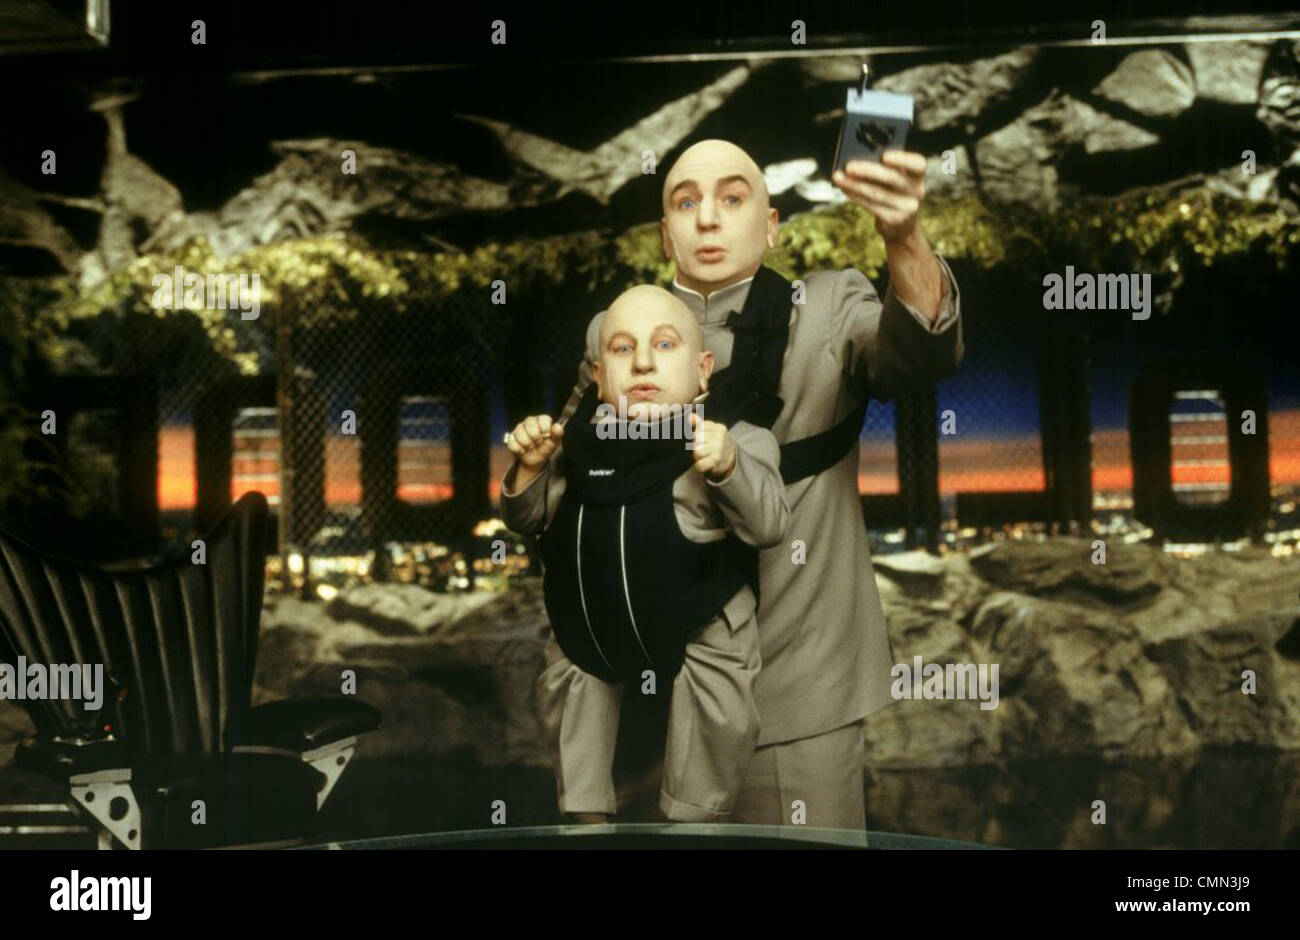 AUSTIN POWERS IN GOLDMEMBER (2002) VERNE TROYER, Mike Meyers, JAY ROACH (DIR) 001 COLLEZIONE MOVIESTORE LTD Foto Stock